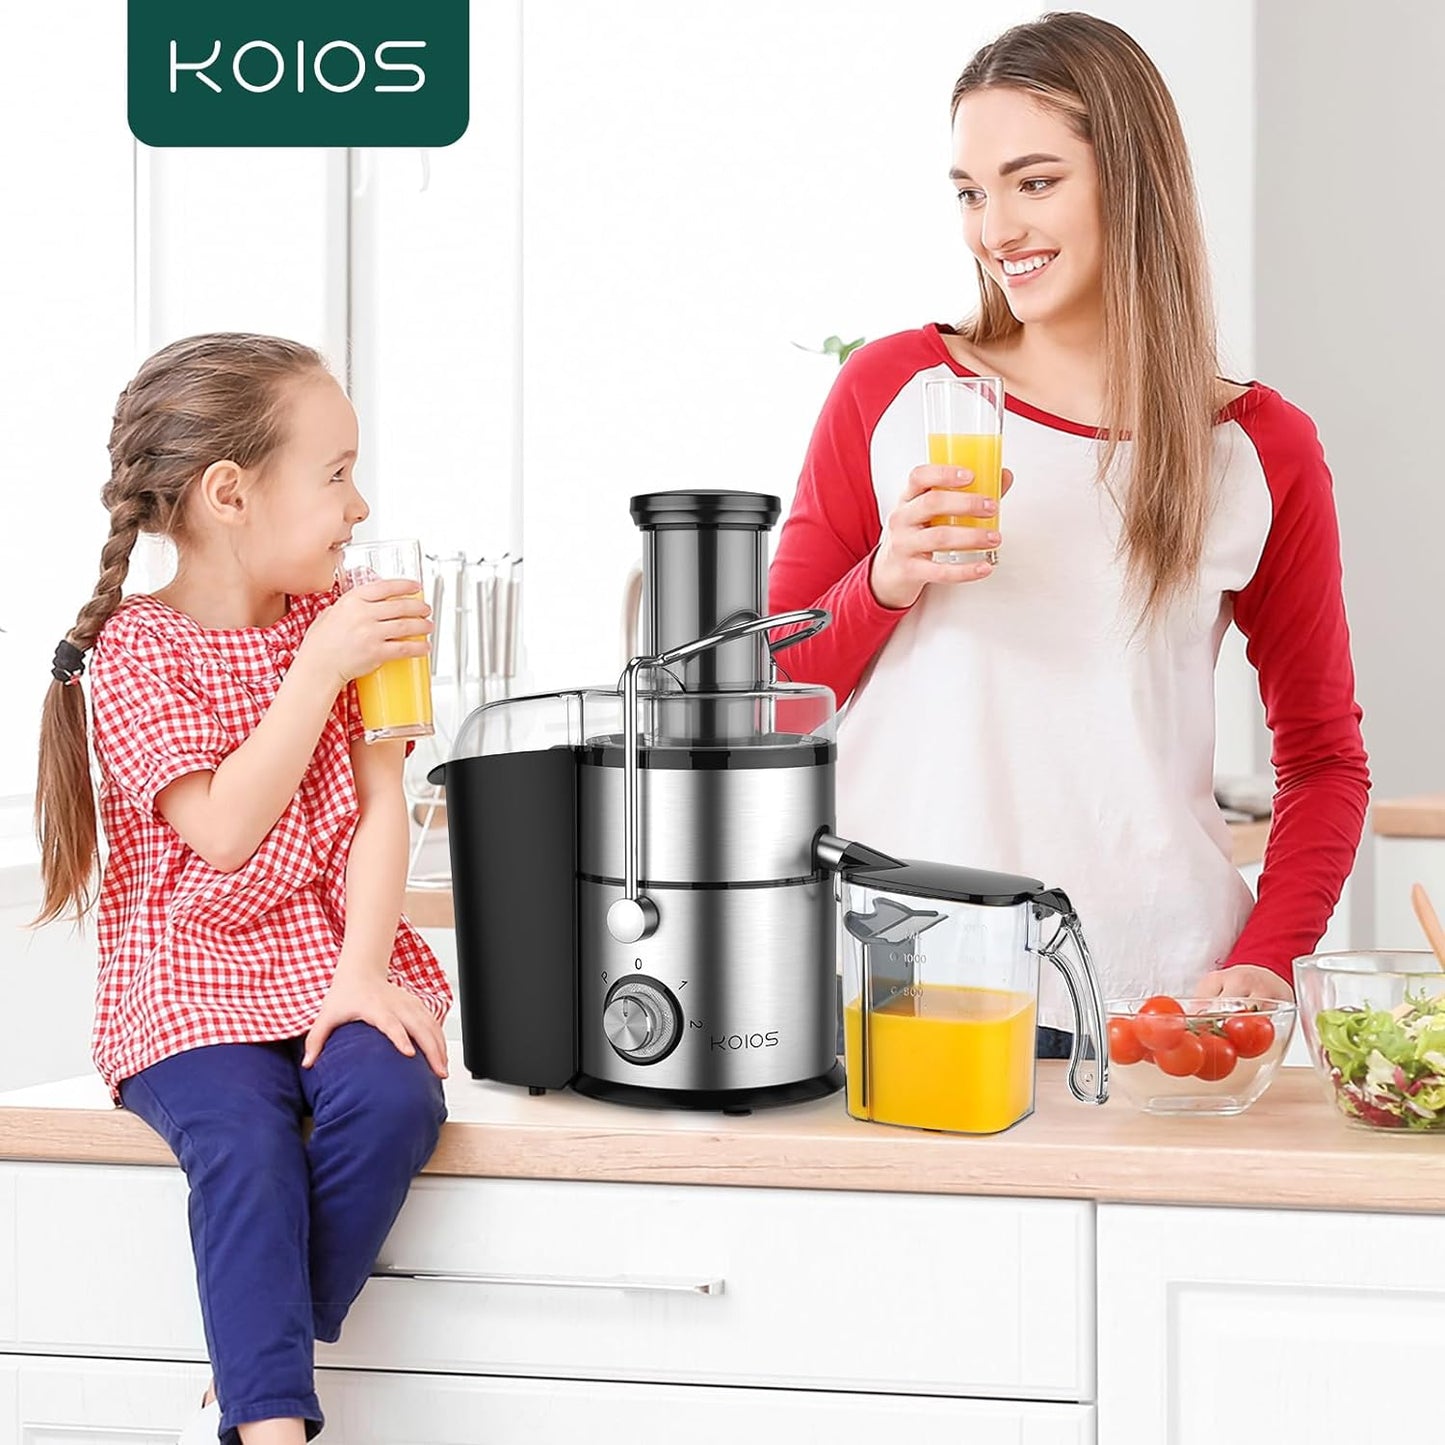 1300W KOIOS Centrifugal Juicer Machine, Juice Extractor with Extra Large 3inch Feed Chute